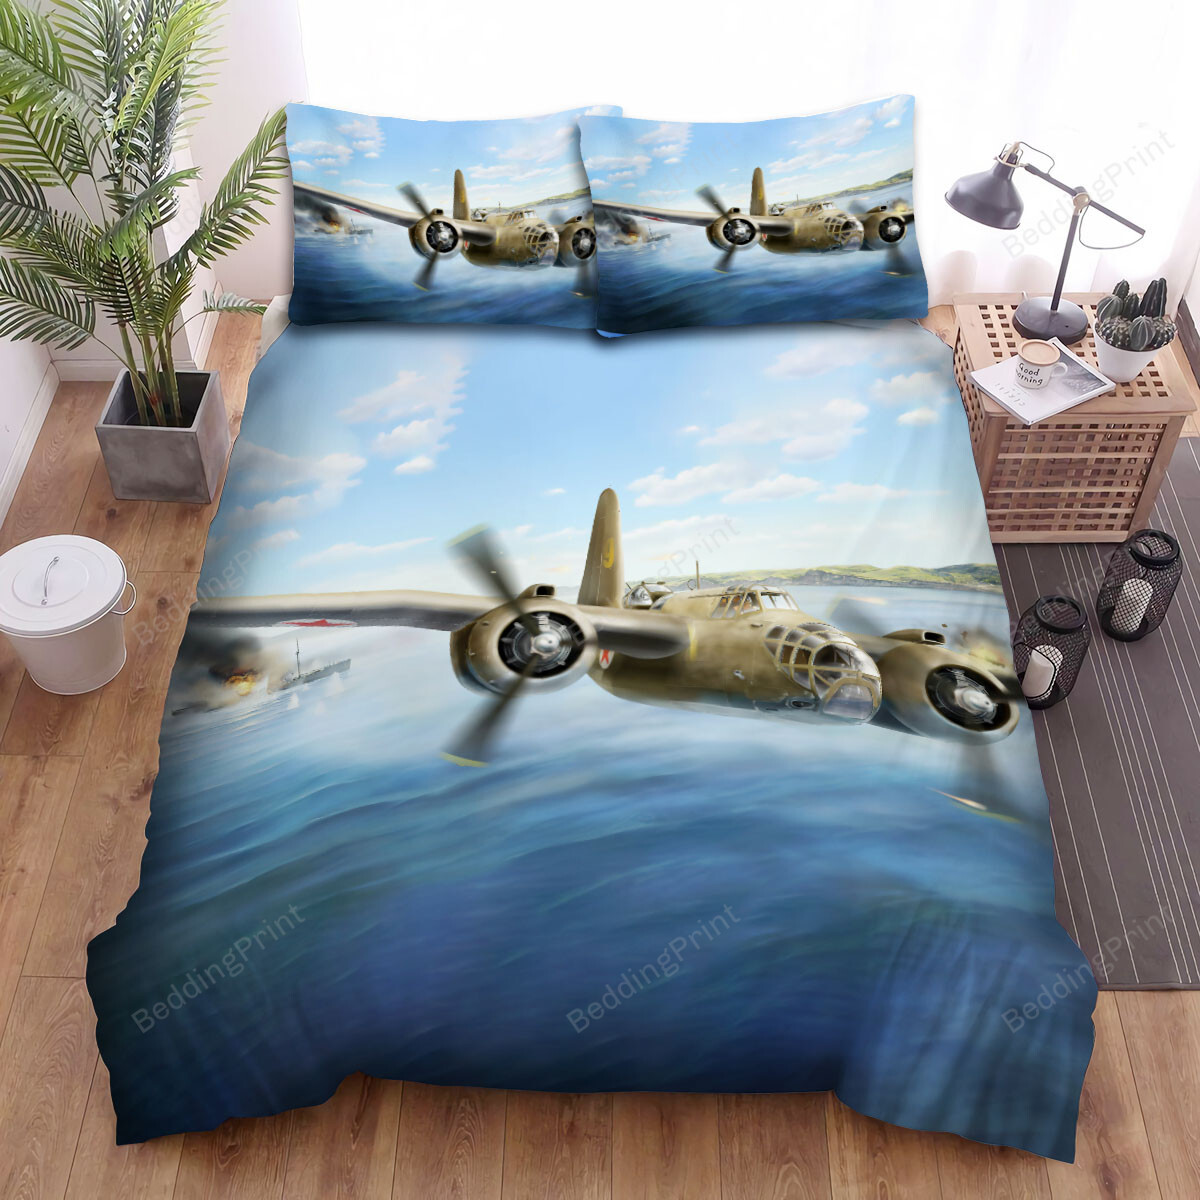 Military Weapon Ww2 Us Plane -  Douglas A20 Finished The Battleship Bed Sheets Spread Duvet Cover Bedding Sets